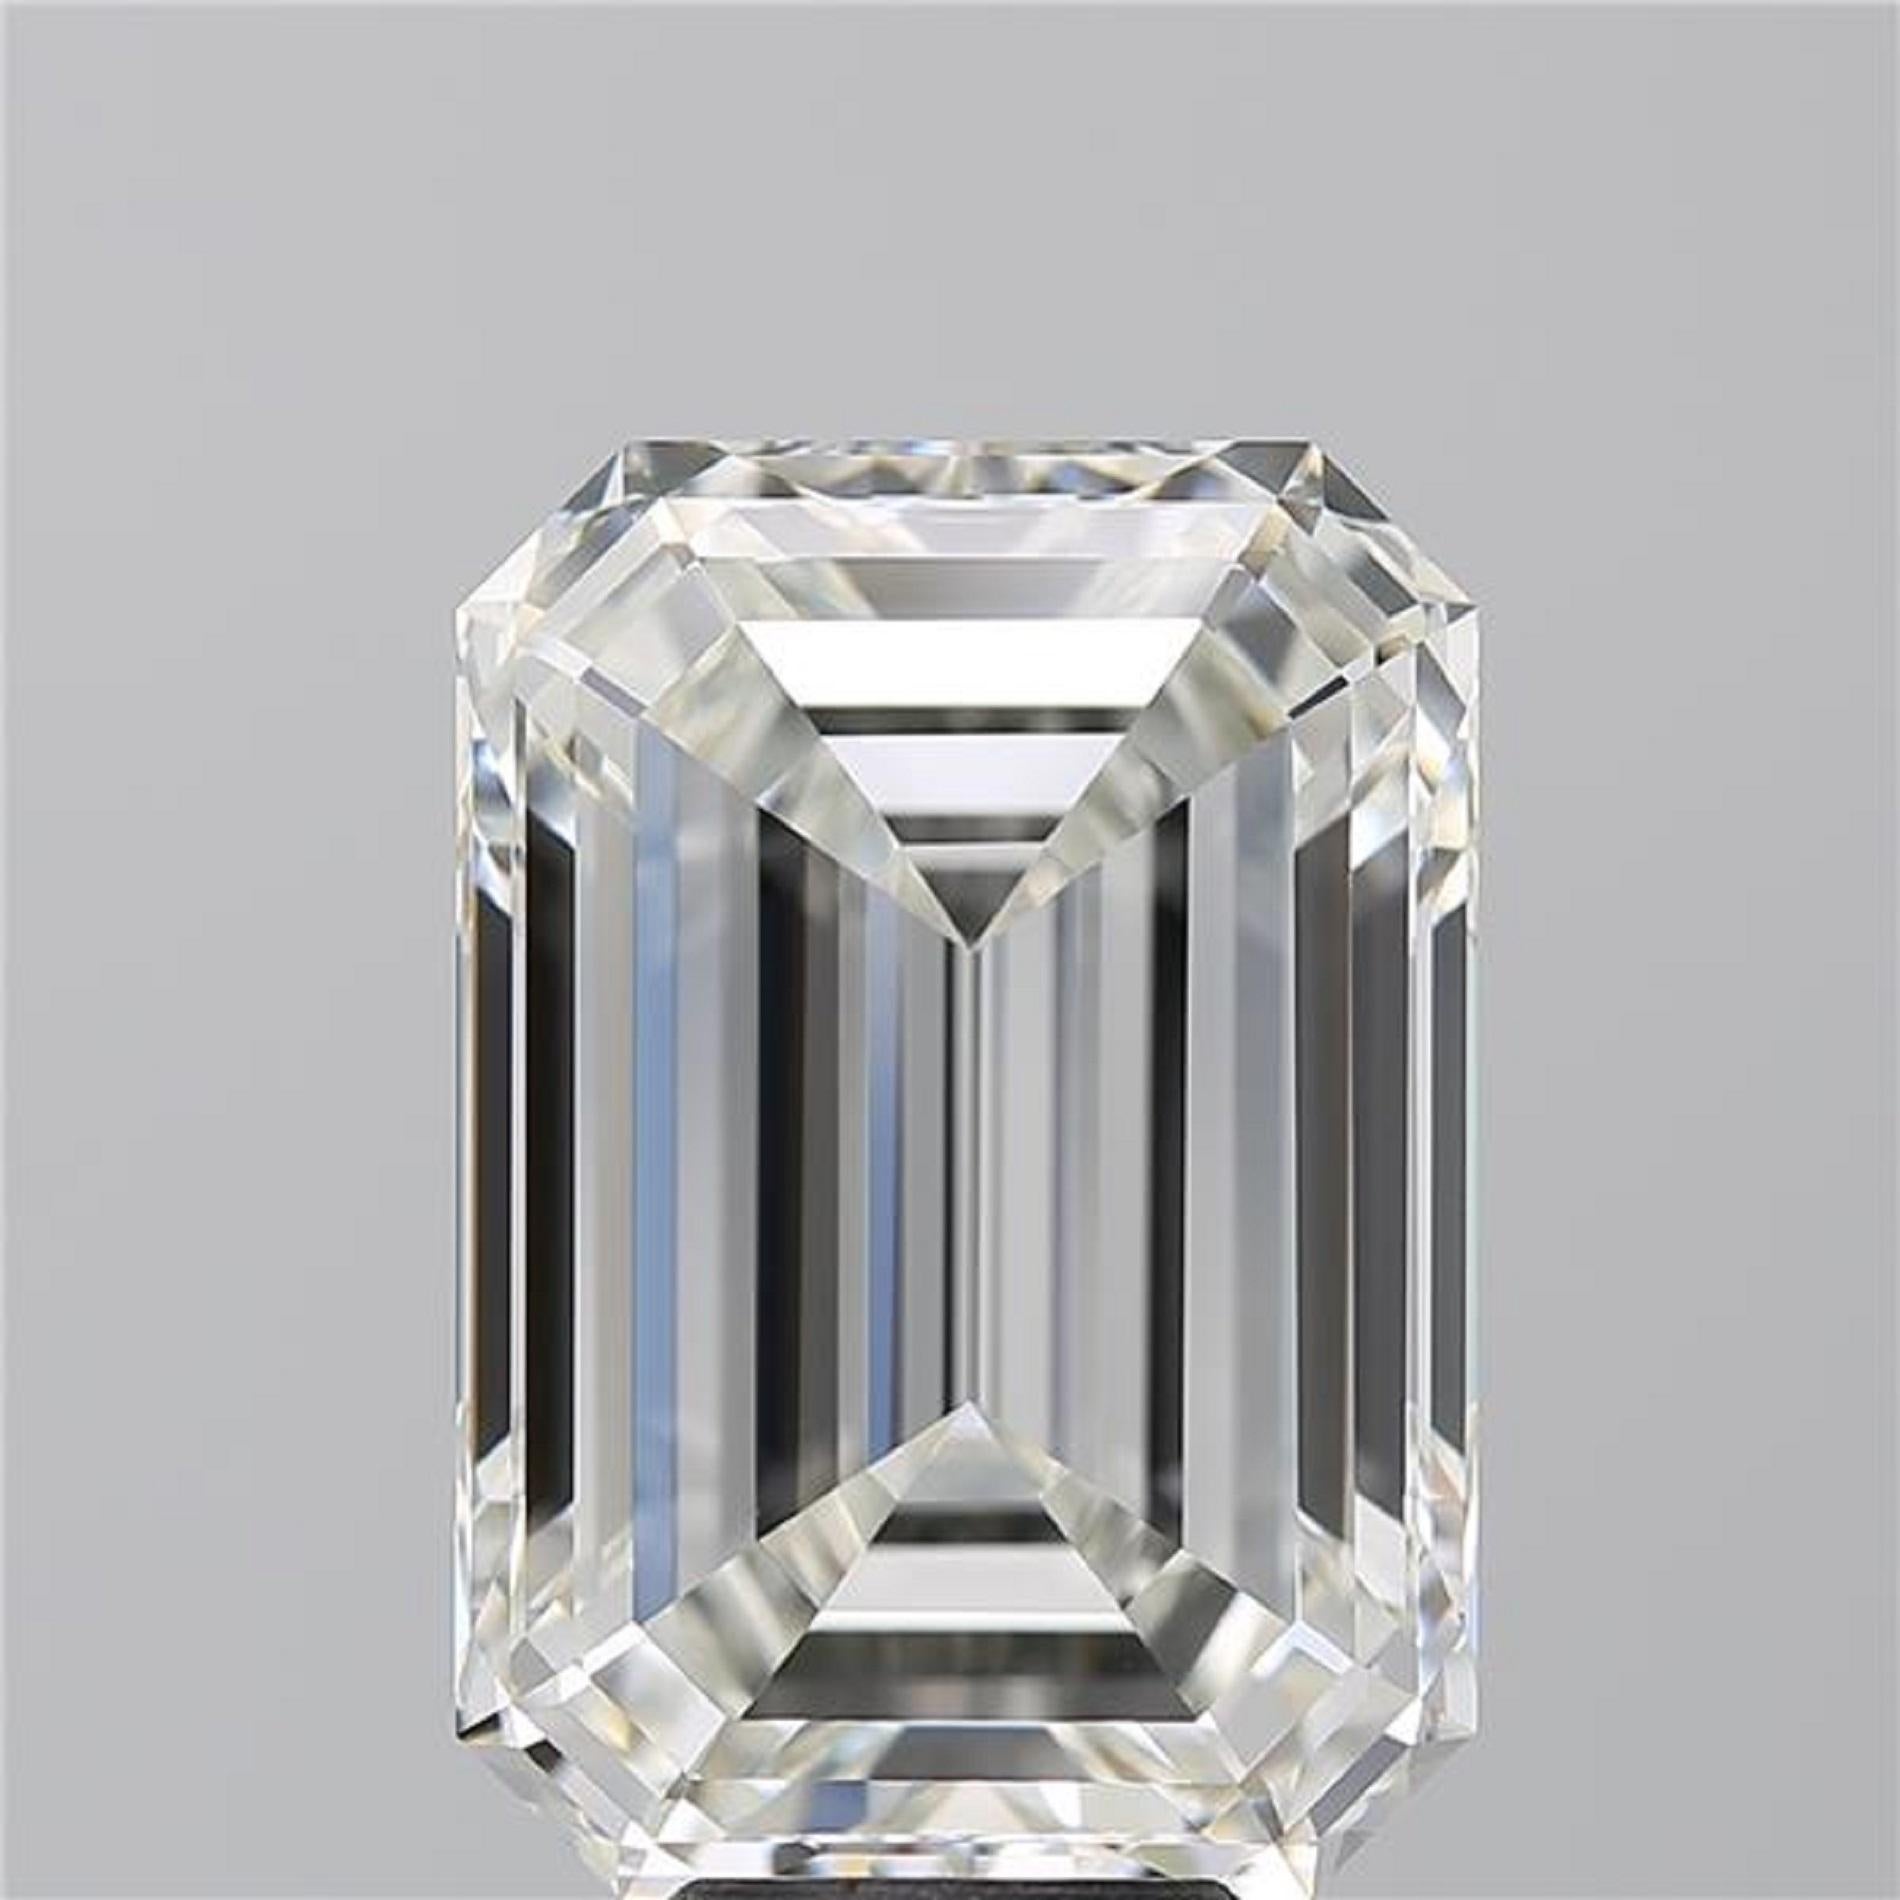 This exquisite ring features a breathtaking GIA Certified 7 Carat Emerald Cut Diamond, renowned for its remarkable clarity and size. The diamond is graded as Internally Flawless, indicating that it has very, very slight inclusions, making it nearly